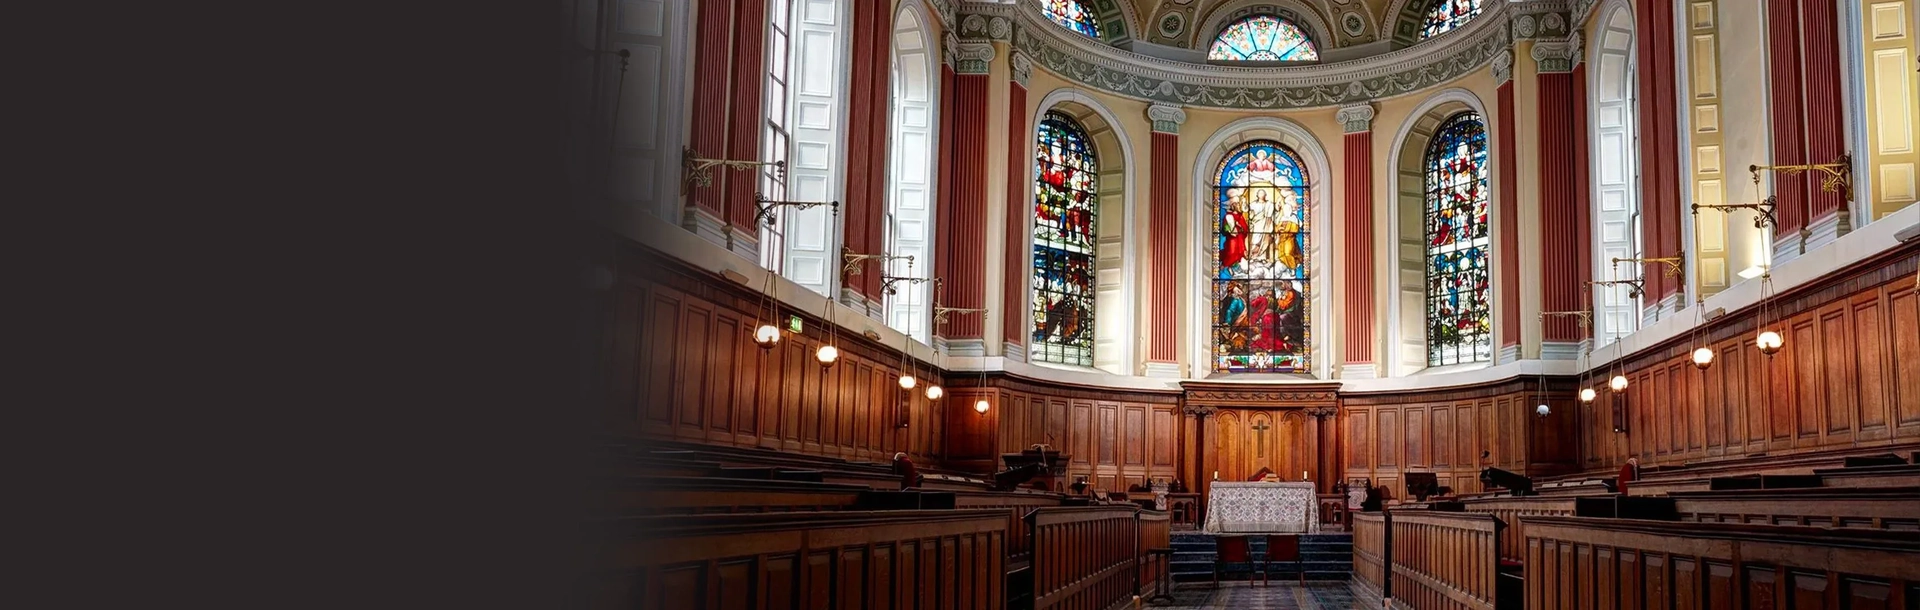 trinity chapel with stained glass windows and wood panelling